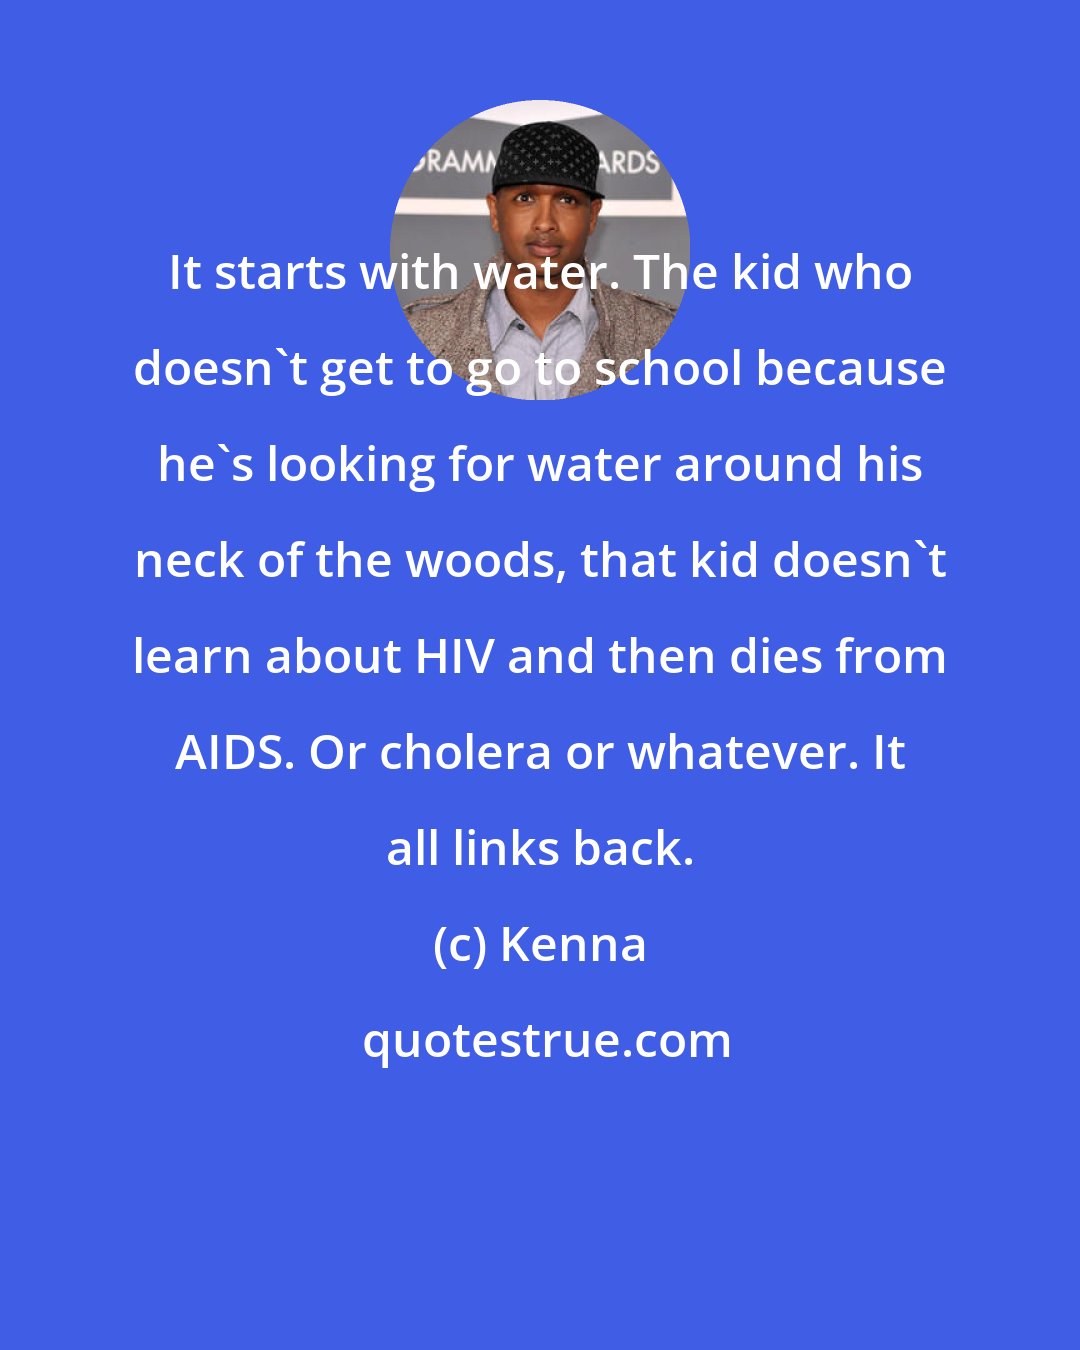 Kenna: It starts with water. The kid who doesn't get to go to school because he's looking for water around his neck of the woods, that kid doesn't learn about HIV and then dies from AIDS. Or cholera or whatever. It all links back.